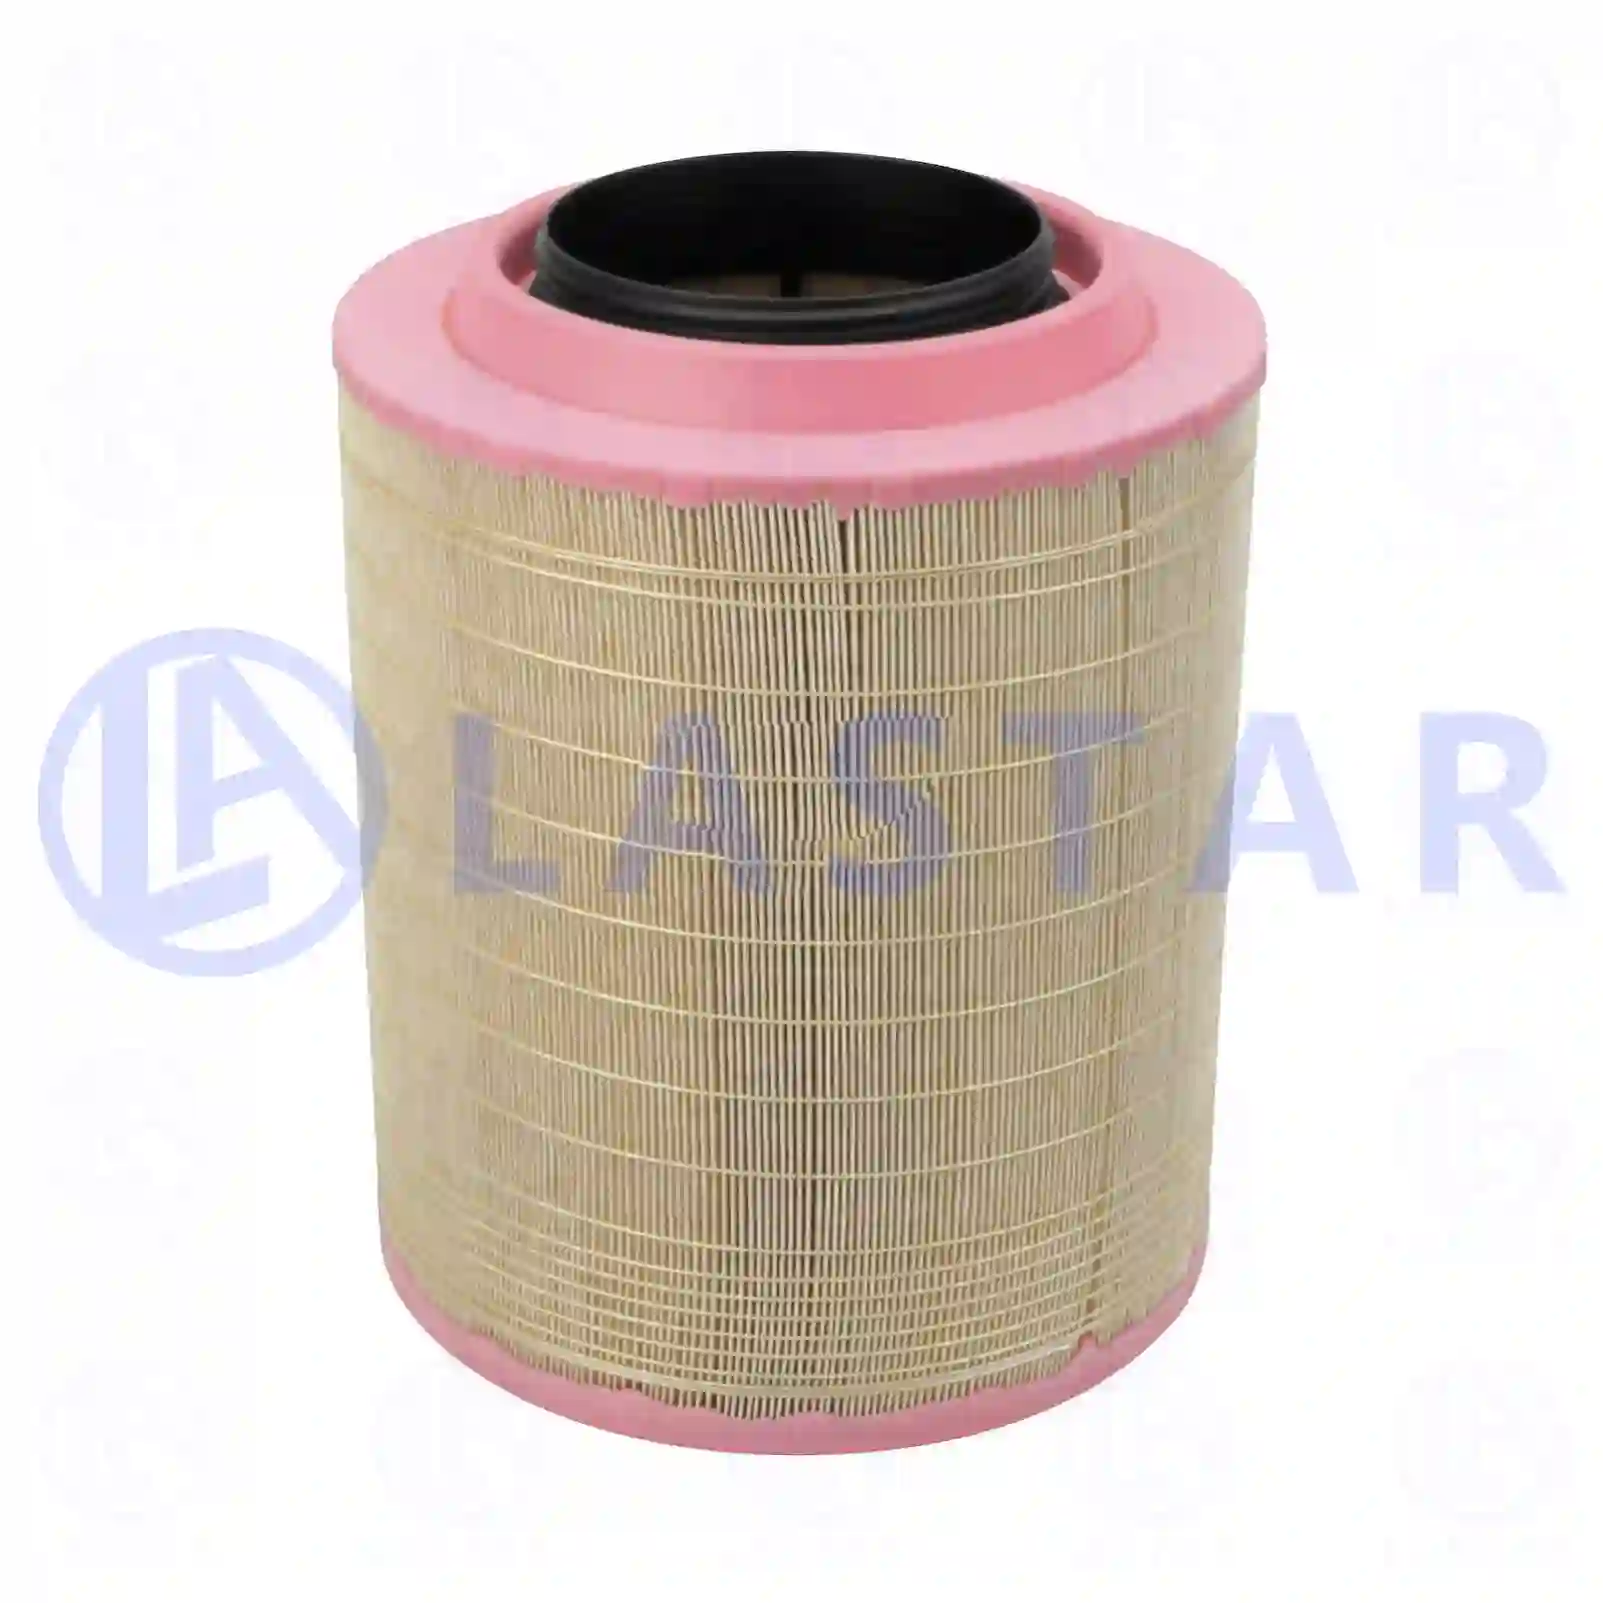 Air filter kit, 77706924, 21115483S, 21115501S, 21834205S ||  77706924 Lastar Spare Part | Truck Spare Parts, Auotomotive Spare Parts Air filter kit, 77706924, 21115483S, 21115501S, 21834205S ||  77706924 Lastar Spare Part | Truck Spare Parts, Auotomotive Spare Parts